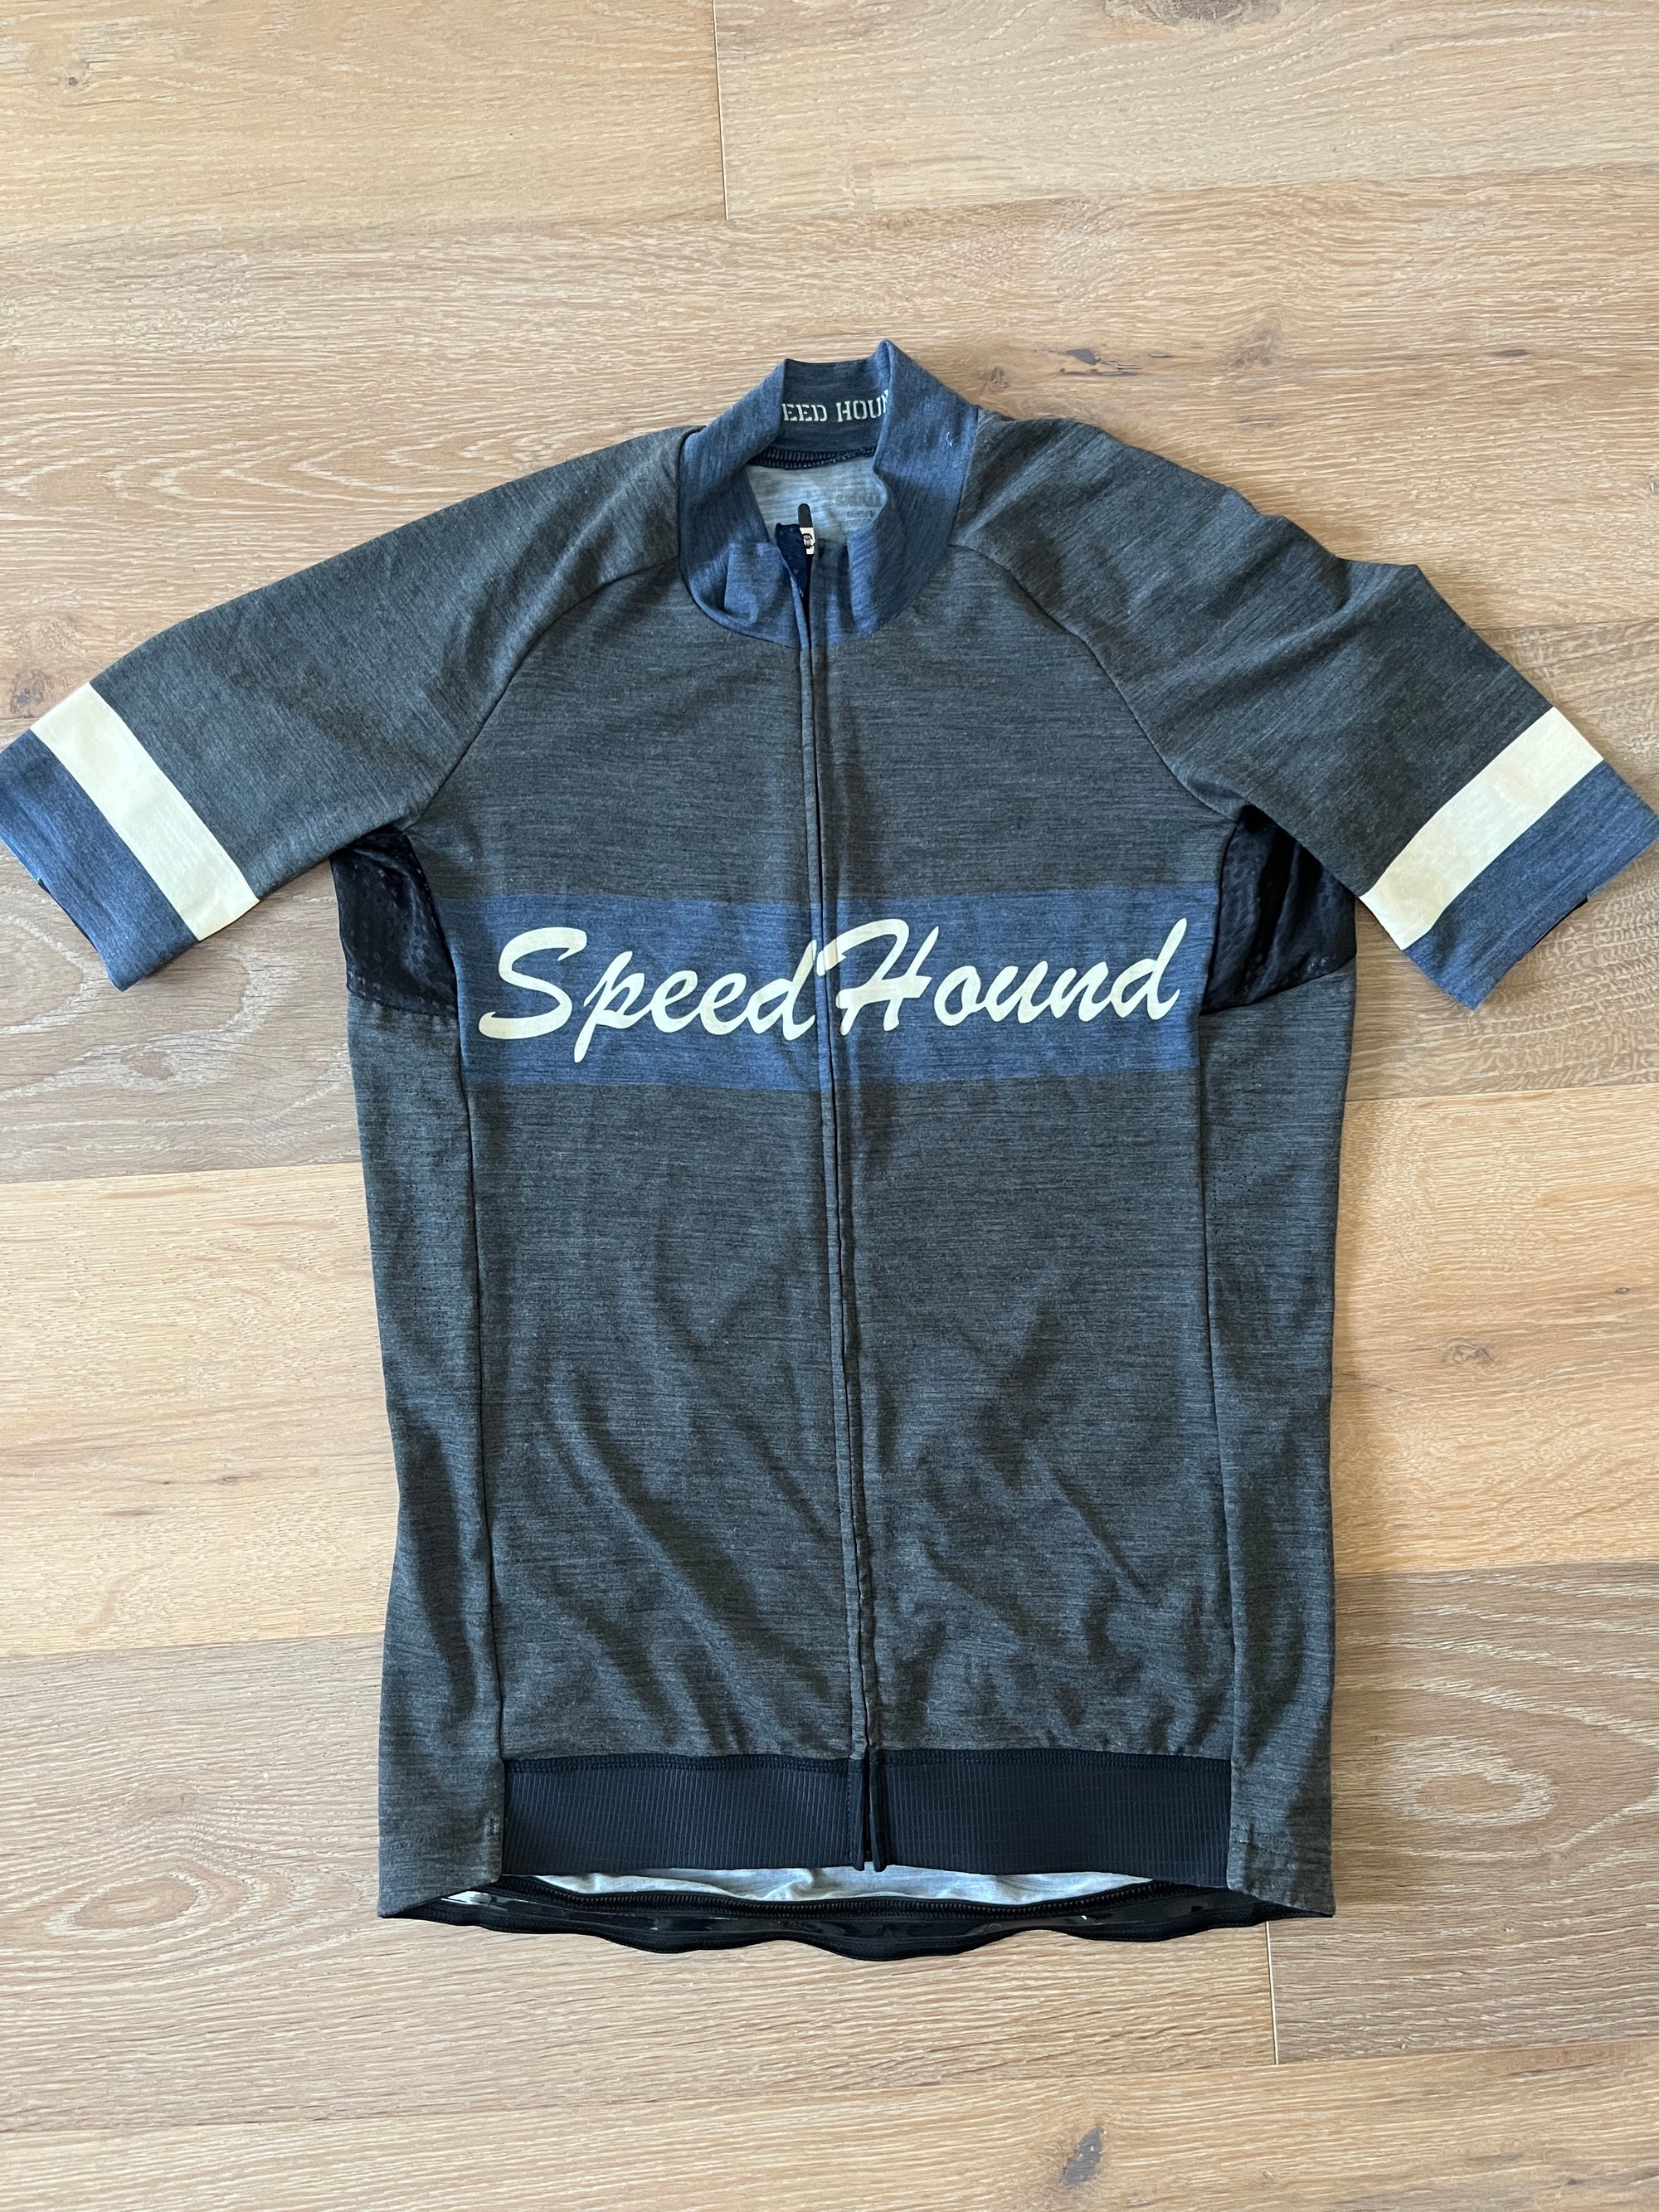 Woolly Mammoth Cycling Jersey (Men's)